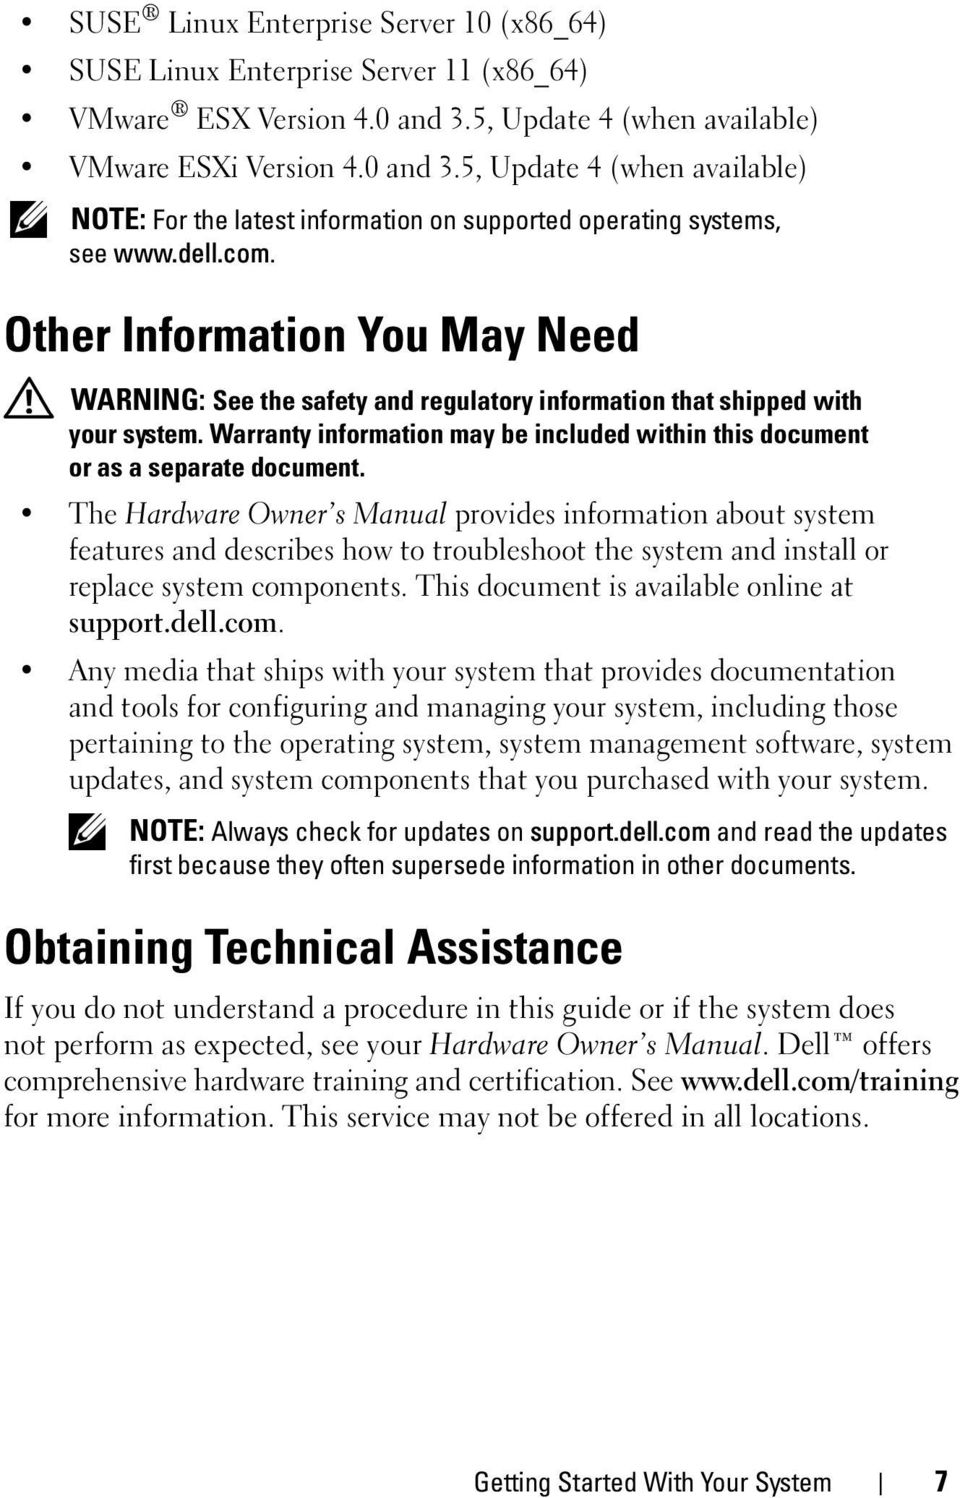 Other Information You May Need WARNING: See the safety and regulatory information that shipped with your system. Warranty information may be included within this document or as a separate document.